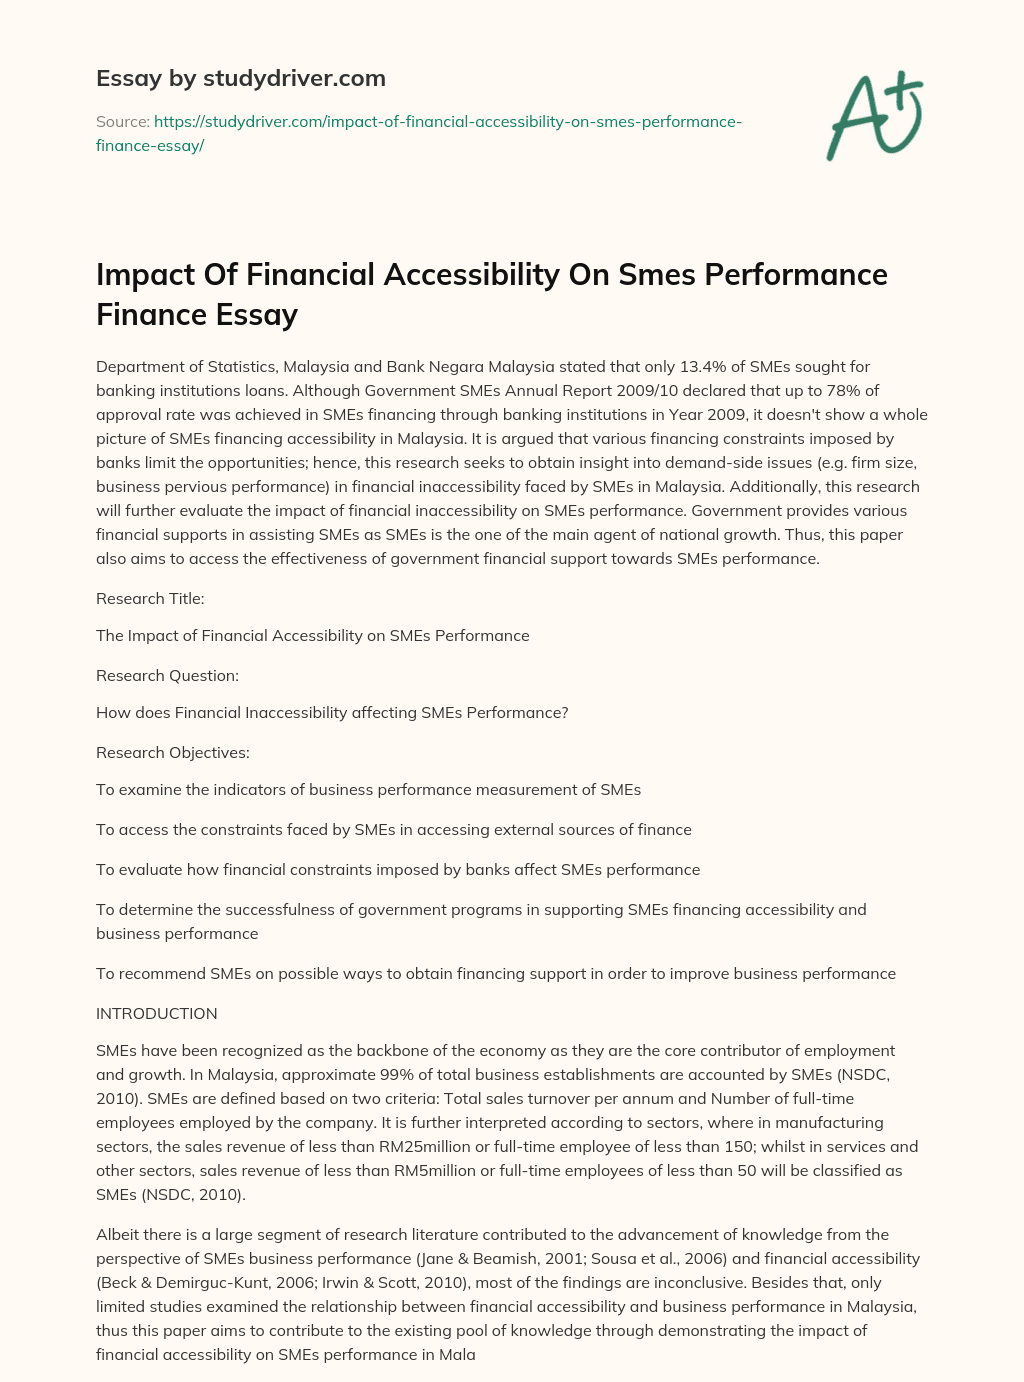 Impact of Financial Accessibility on Smes Performance Finance Essay essay